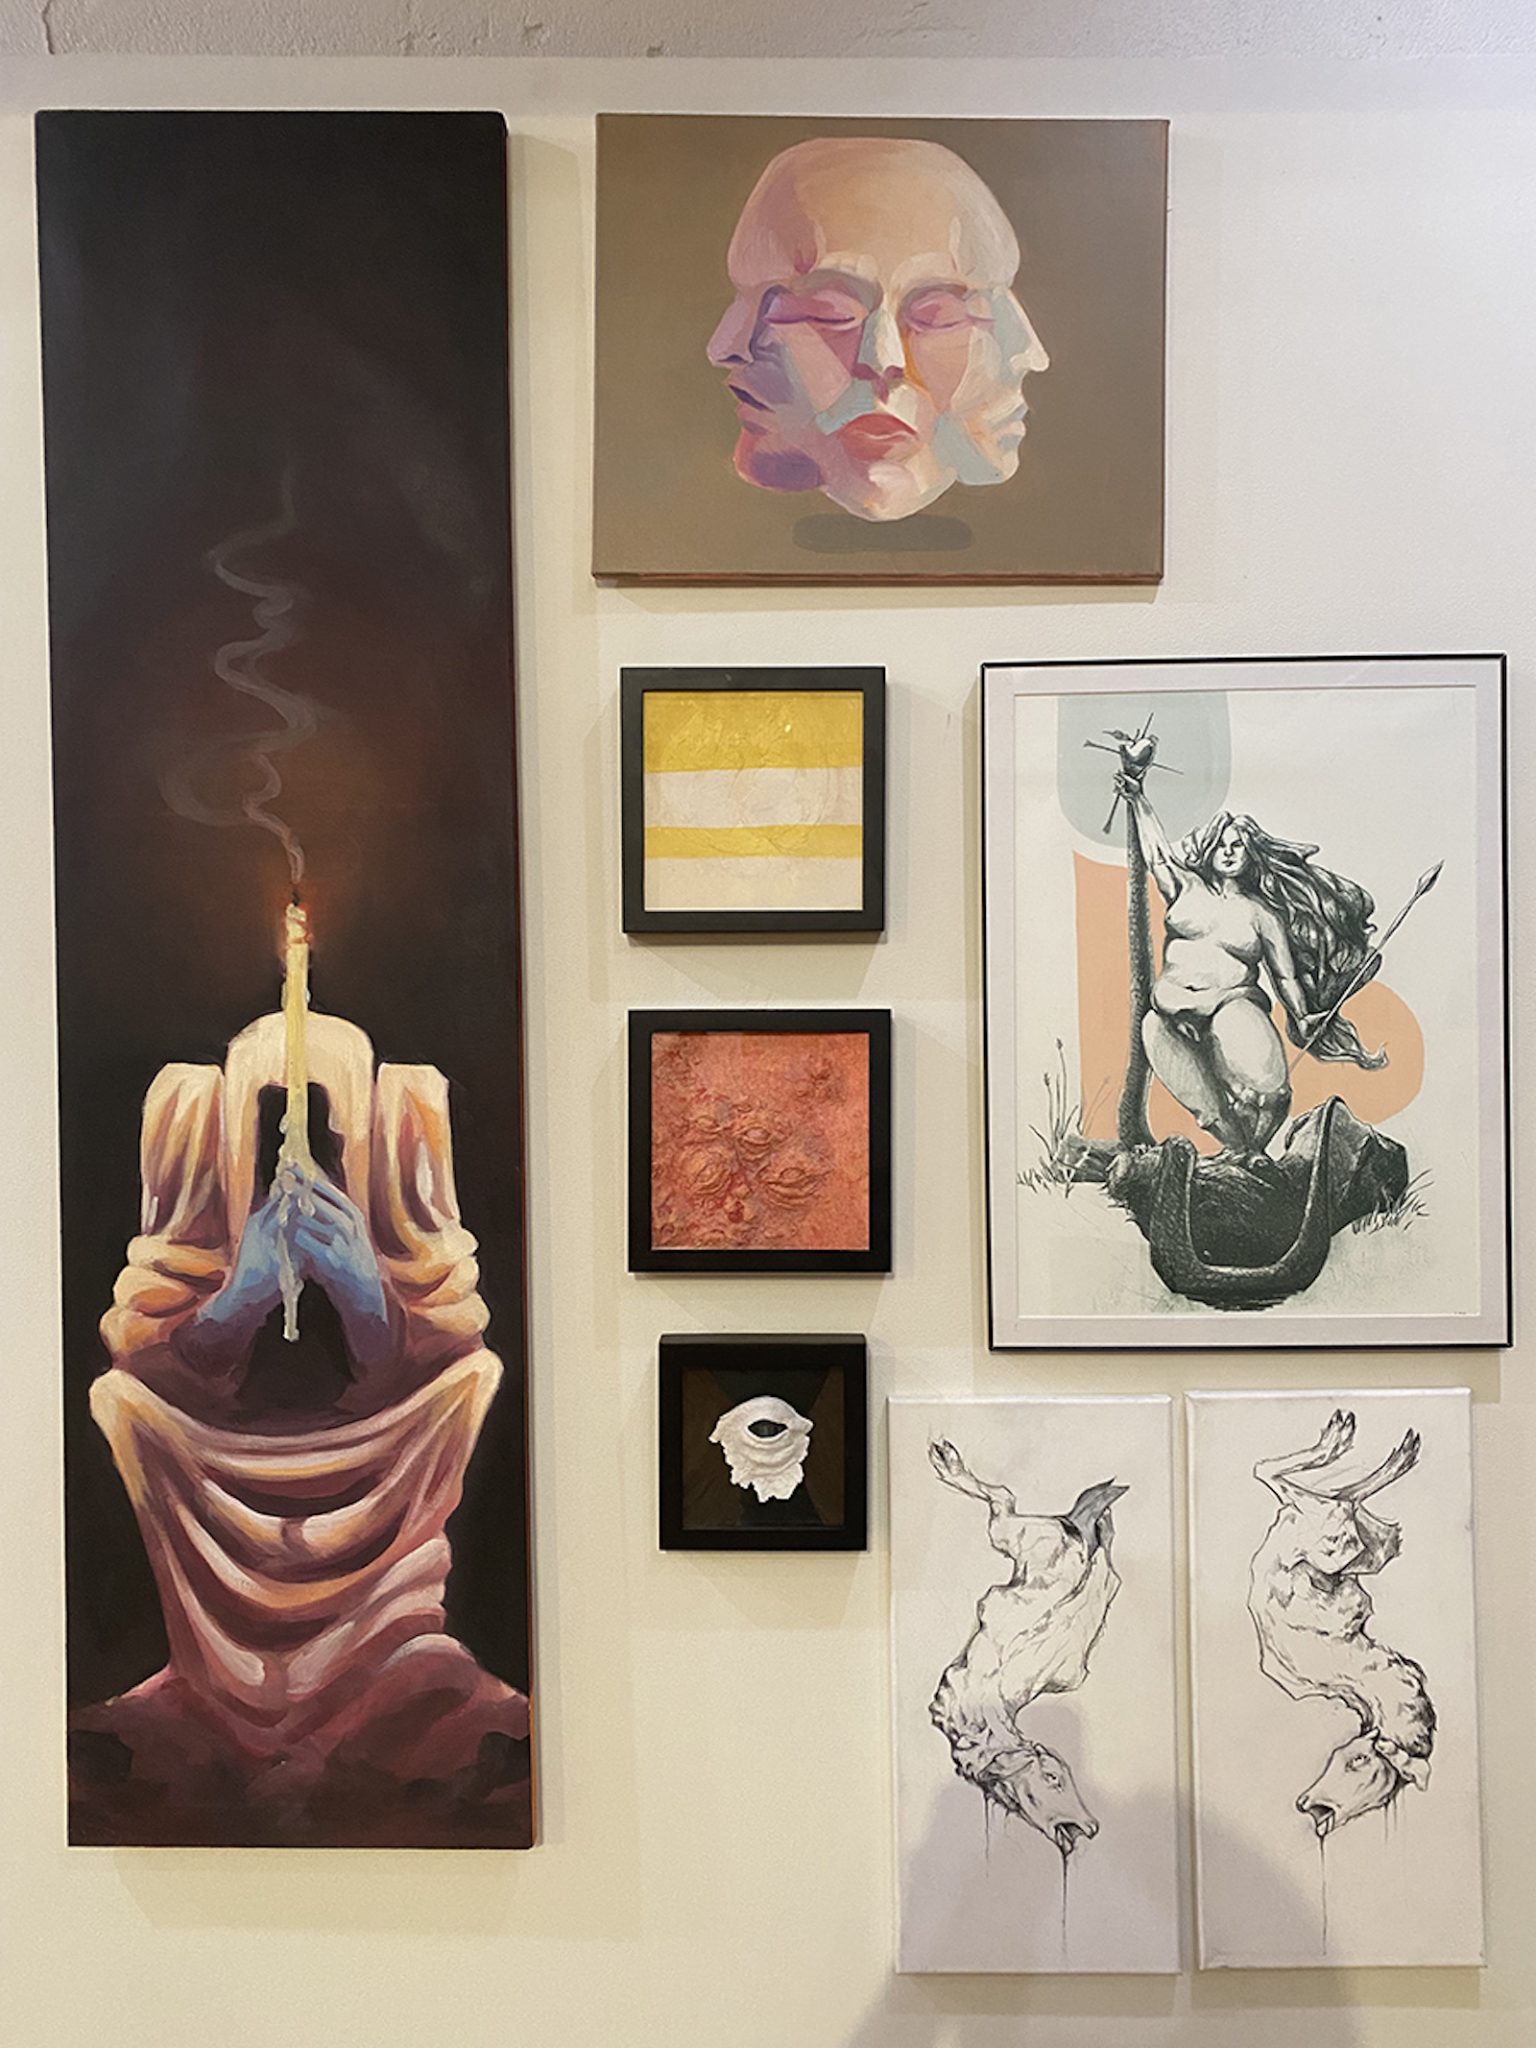 A collection of artworks from the display